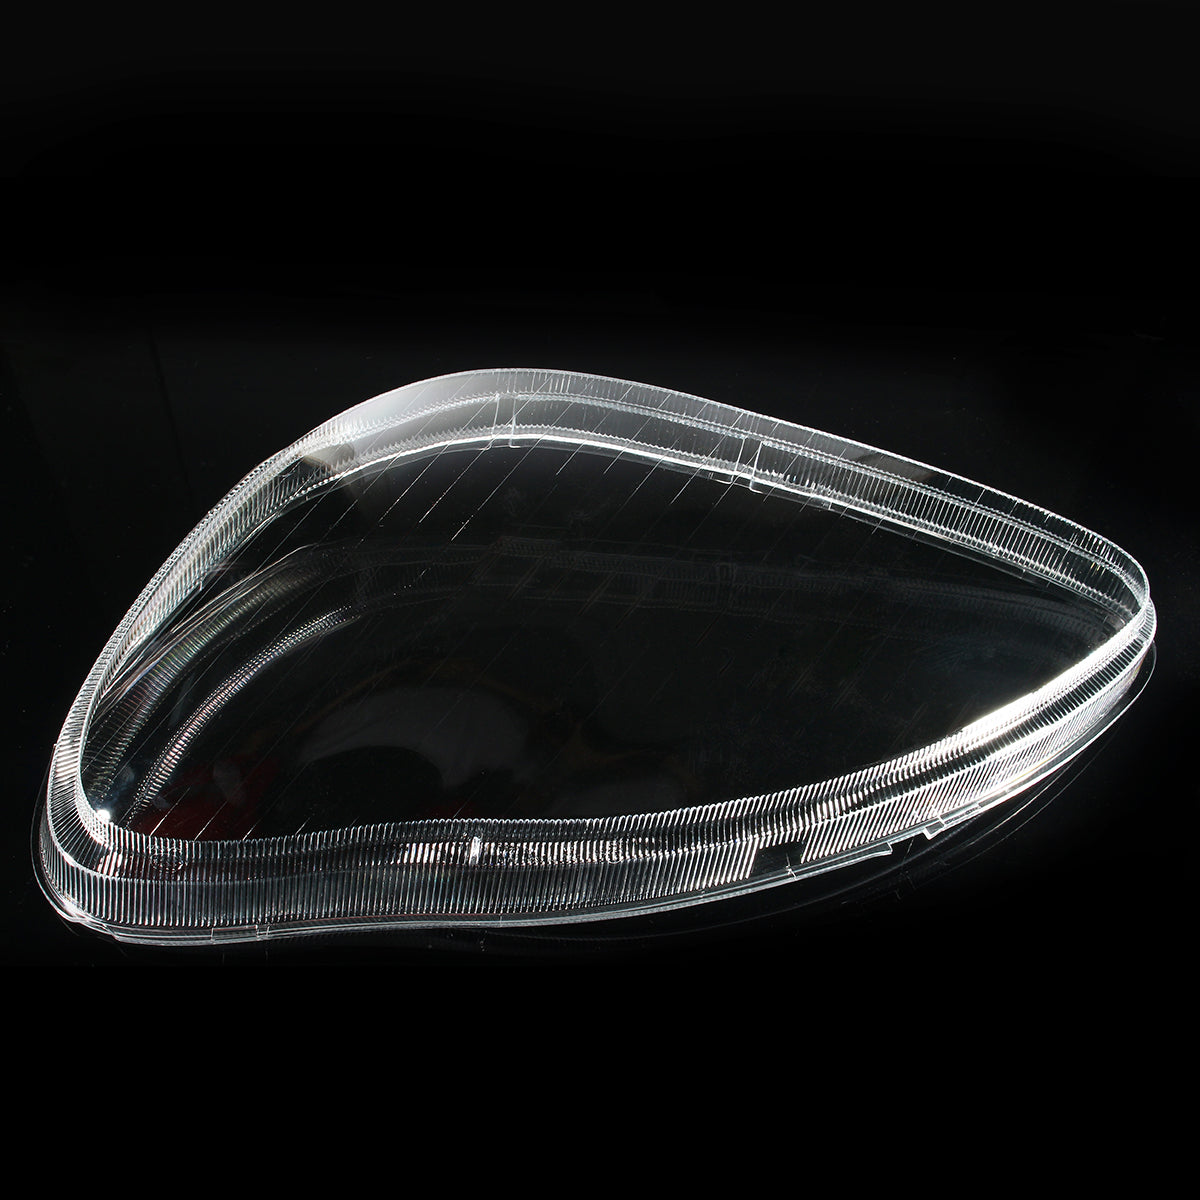 Black Headlight Clear Lens Cover Replacement Cover for Benz W220 S600 S500 S320 S350 S280 1998-2005